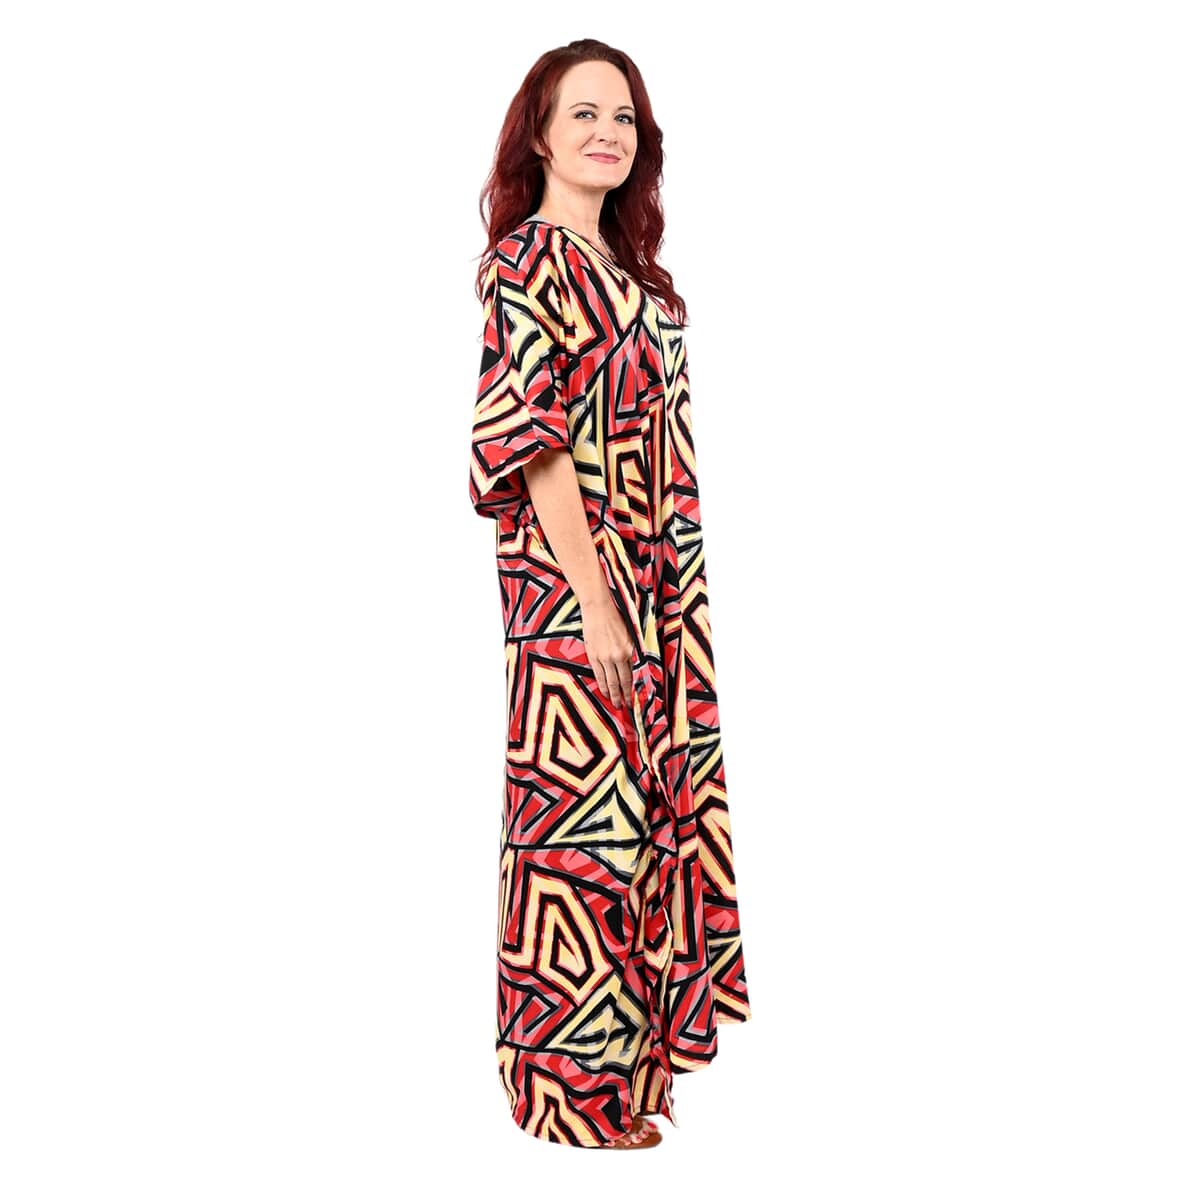 Winlar Red Triangle Print V-Neck Long Microfiber Kaftan Dress - One Size Fits Most, Holiday Dress, Swimsuit Cover Up, Beach Cover Ups, Holiday Clothes image number 2